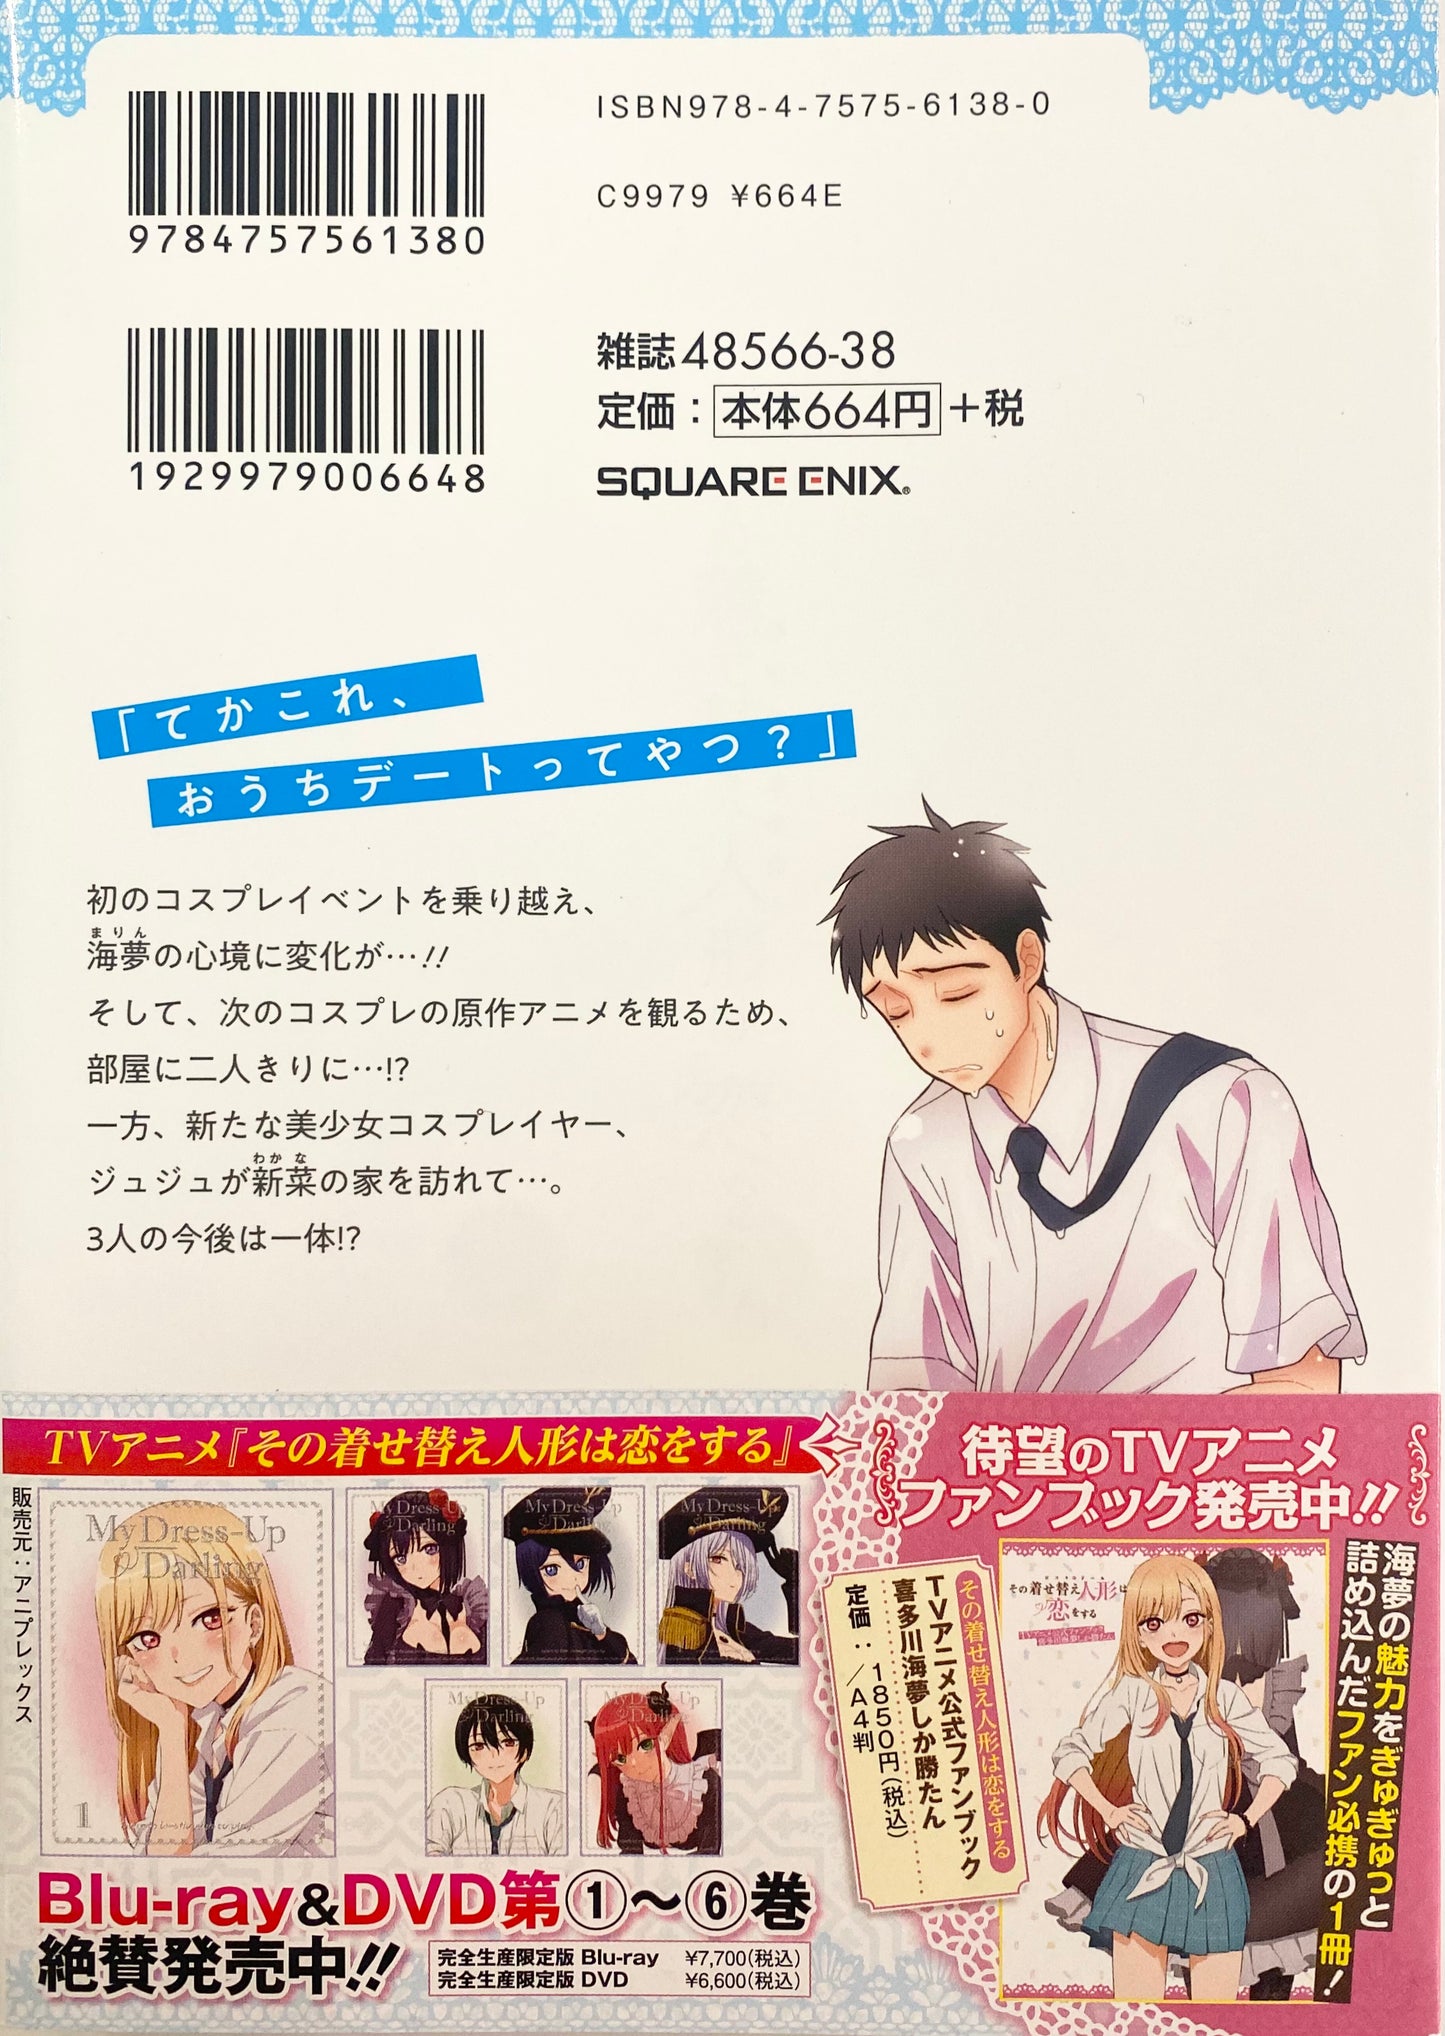 My Dress-Up Darling Vol.3-Official Japanese Edition